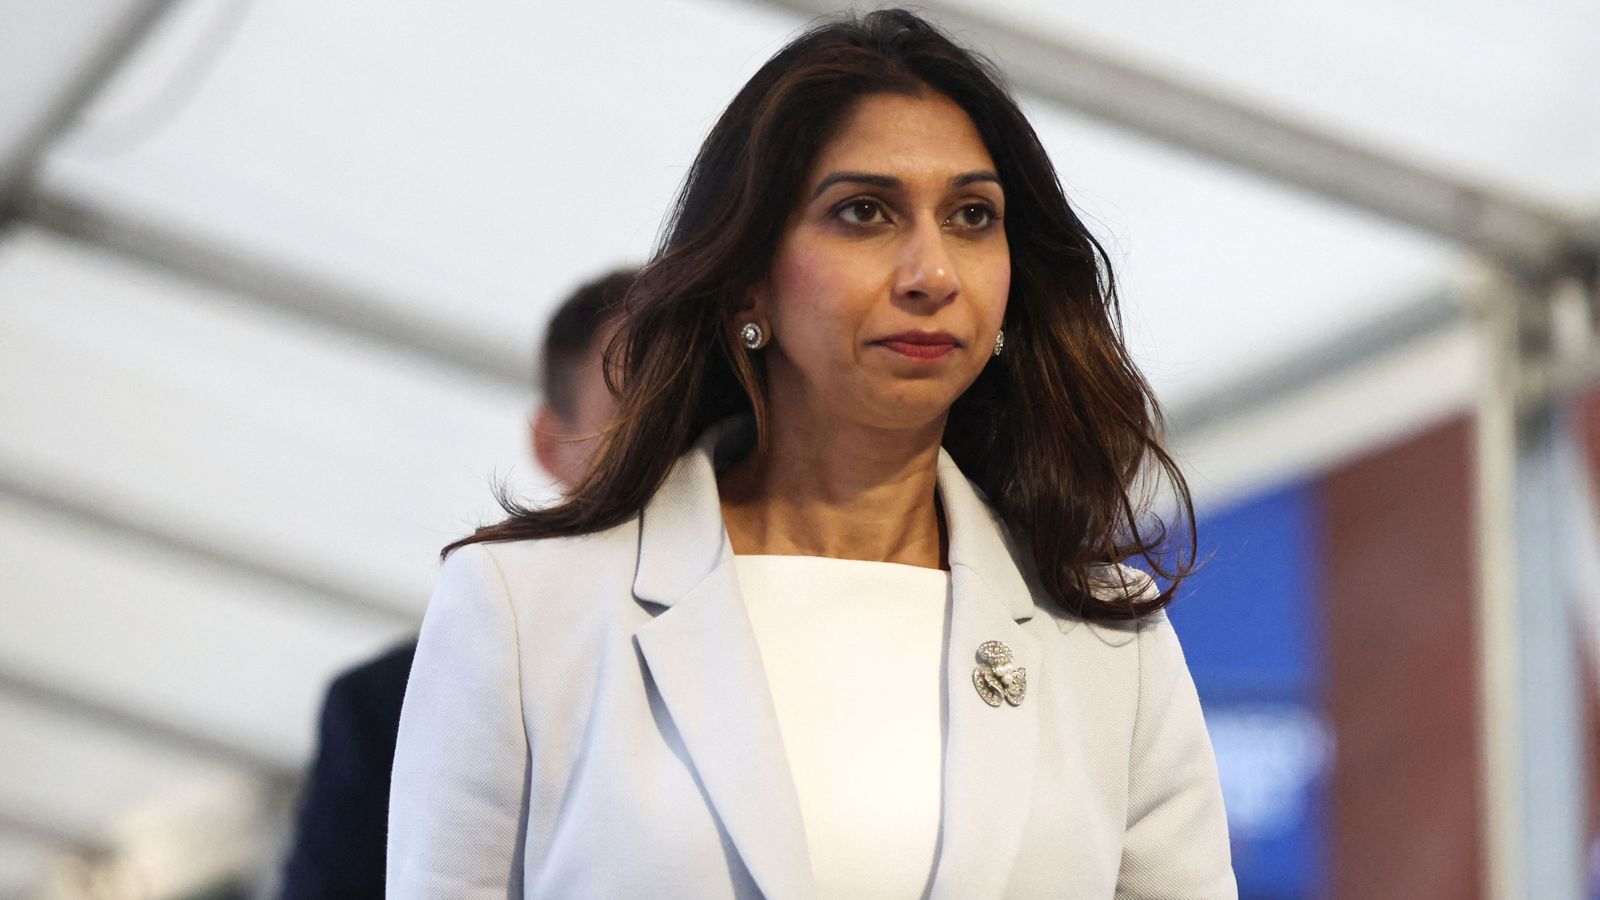 King's Speech: Sir Keir Starmer attacks 'divisive brand' of Suella Braverman - warning PM of her 'ambitions'